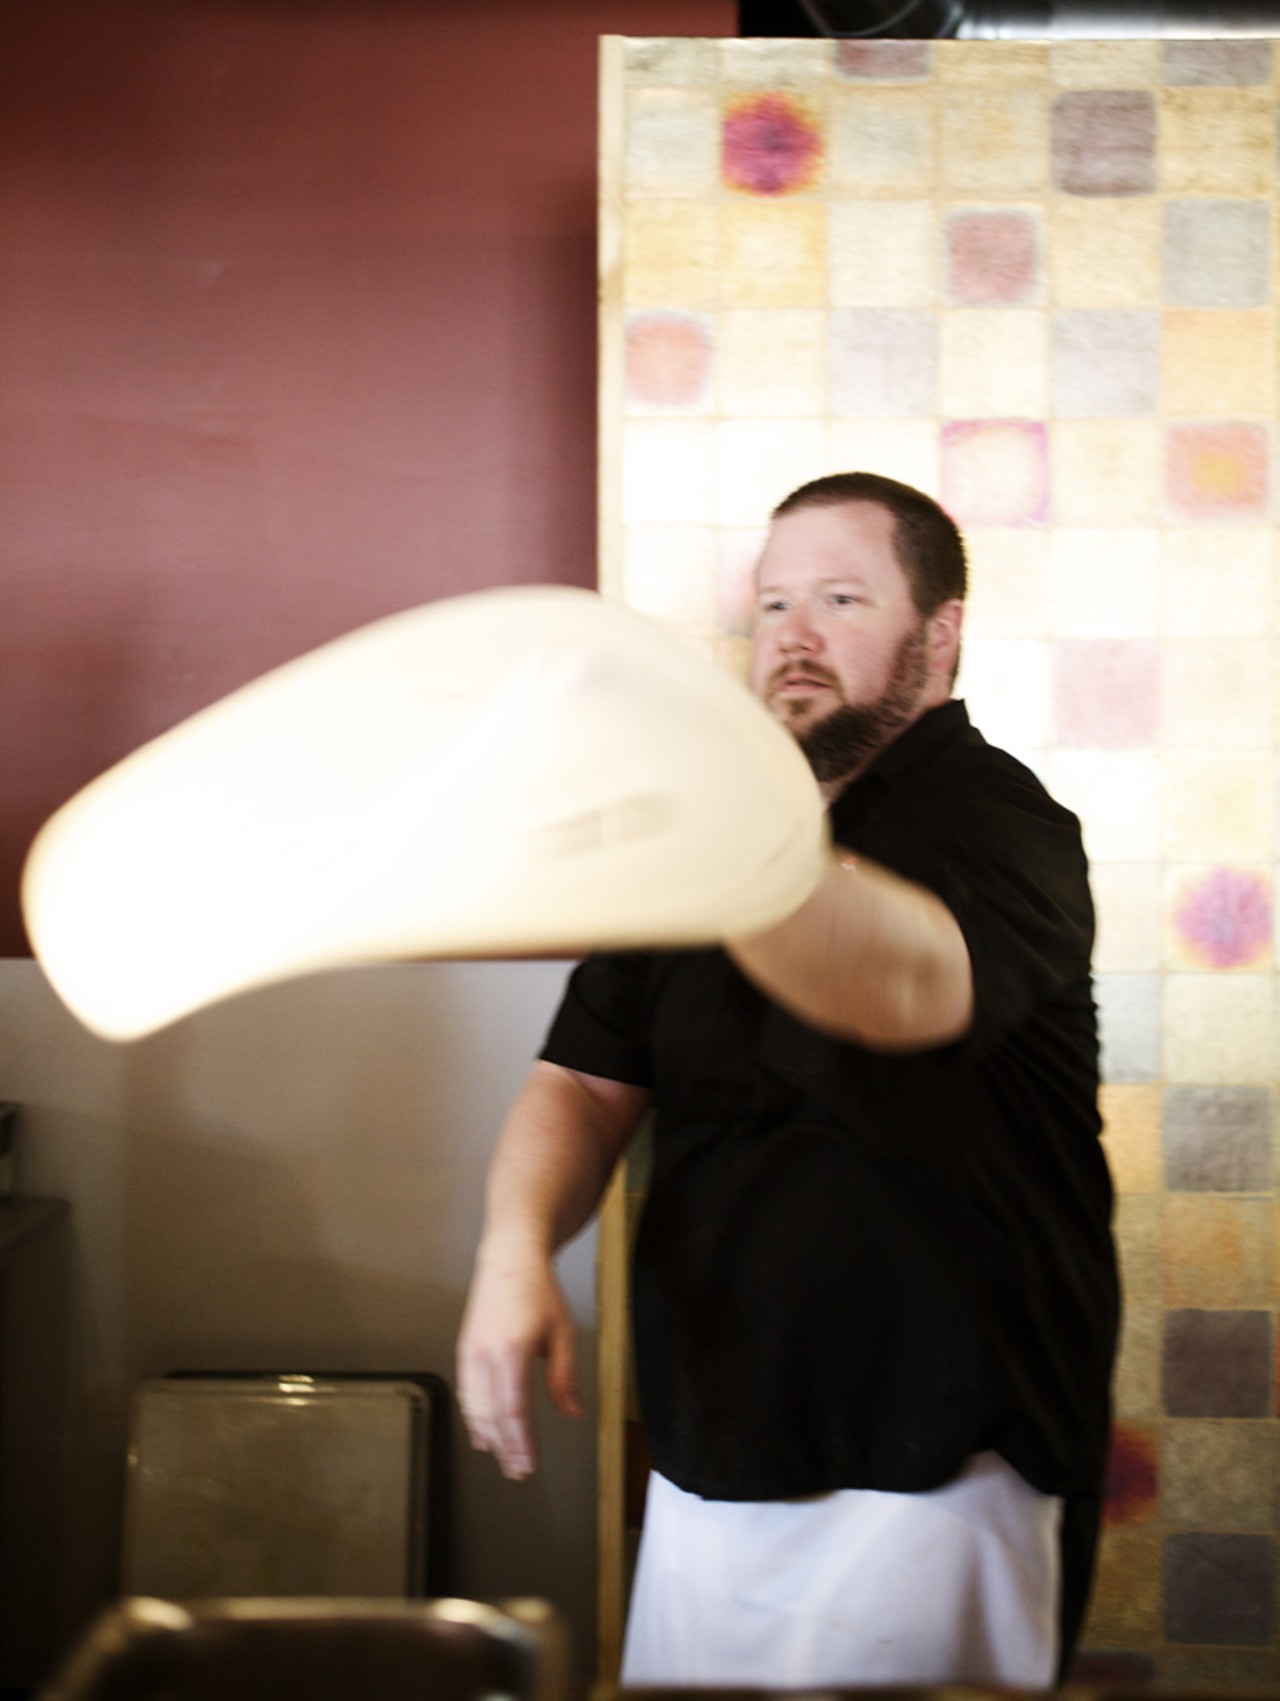 Executive kitchen manager Randall Eickmeyer tosses the pizza dough.